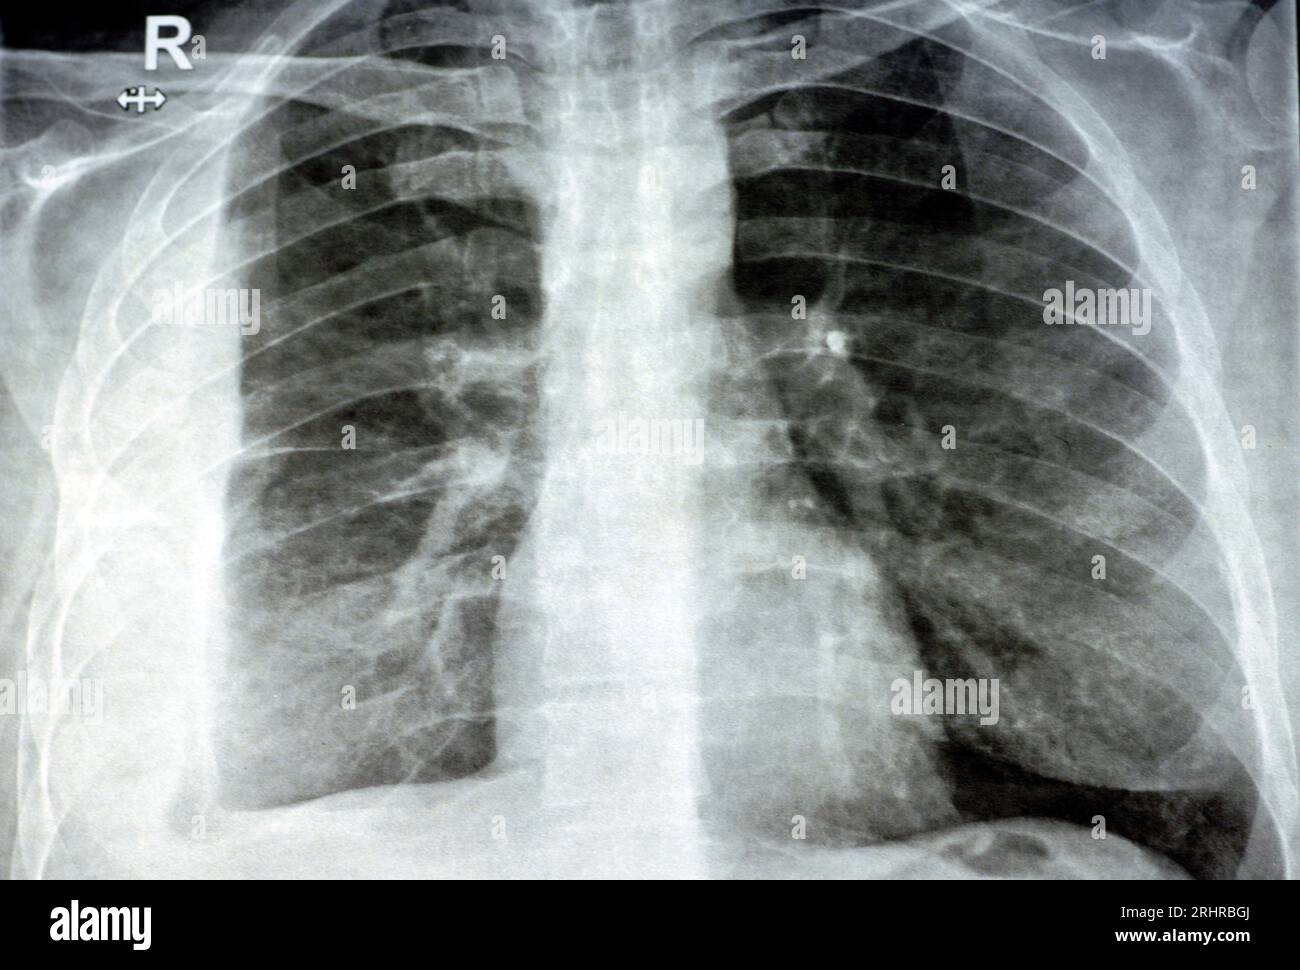 Plain X ray for a patient with aspiration pneumonia right lung, empyema, pleural effusion after insertion of a chest thoracostomy tube to drain the pu Stock Photo